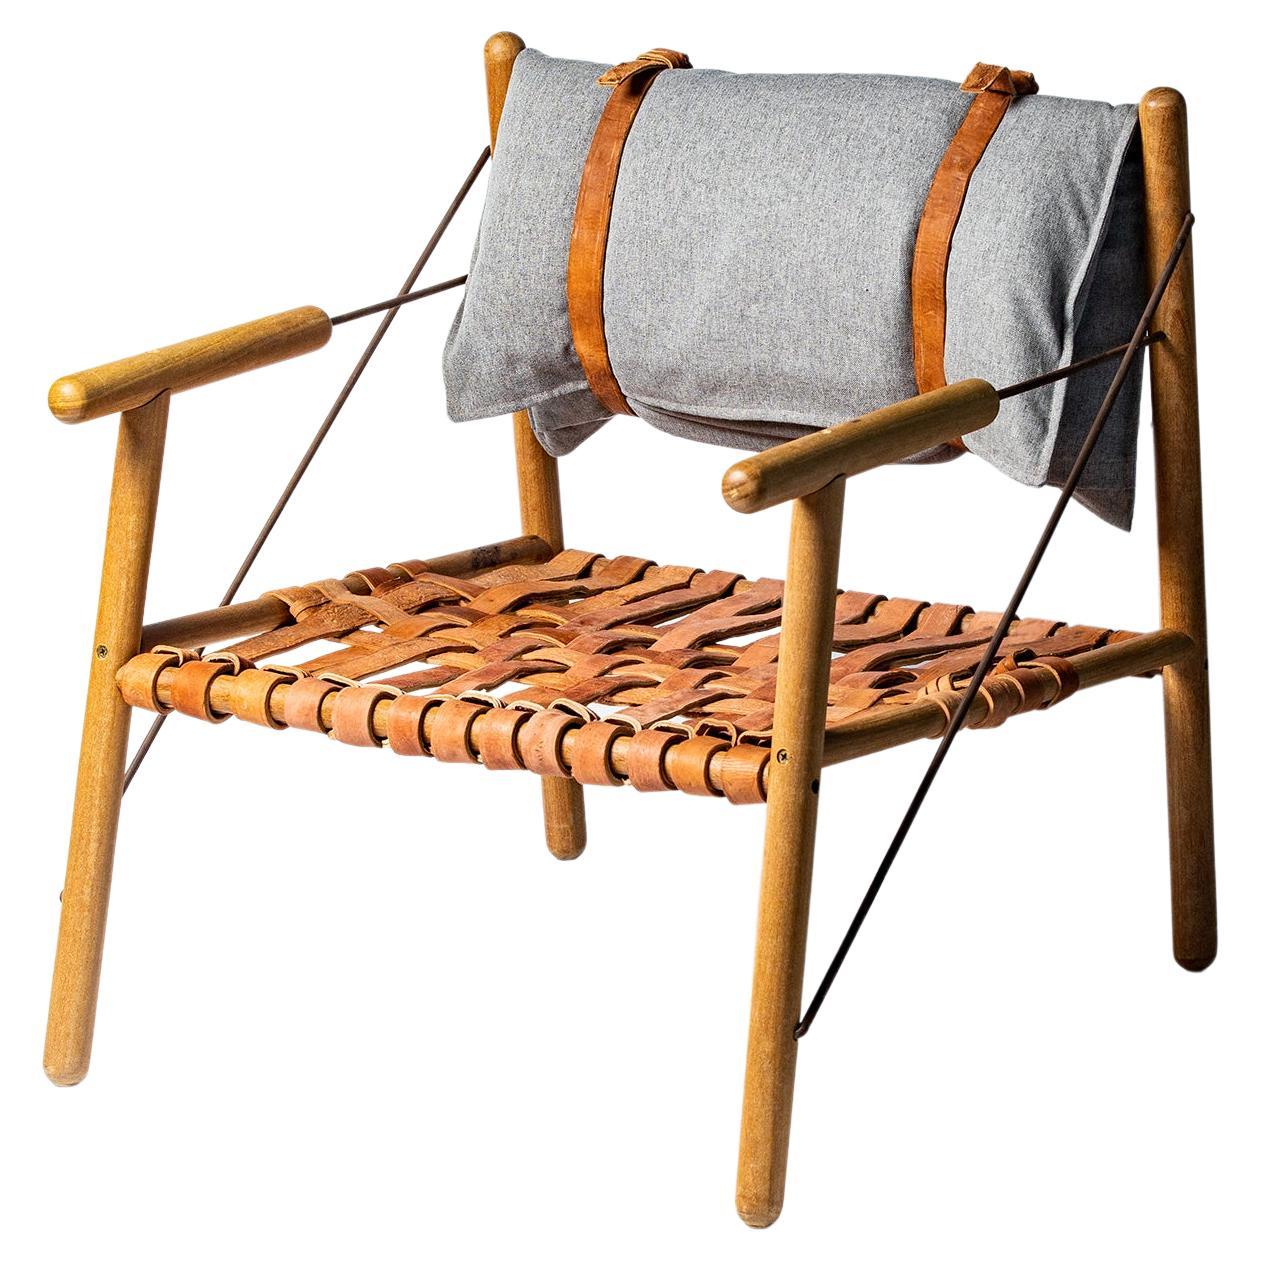 Arreio Armchair, with Handcrafted Natural Leather Belts from Interior of Brazil For Sale